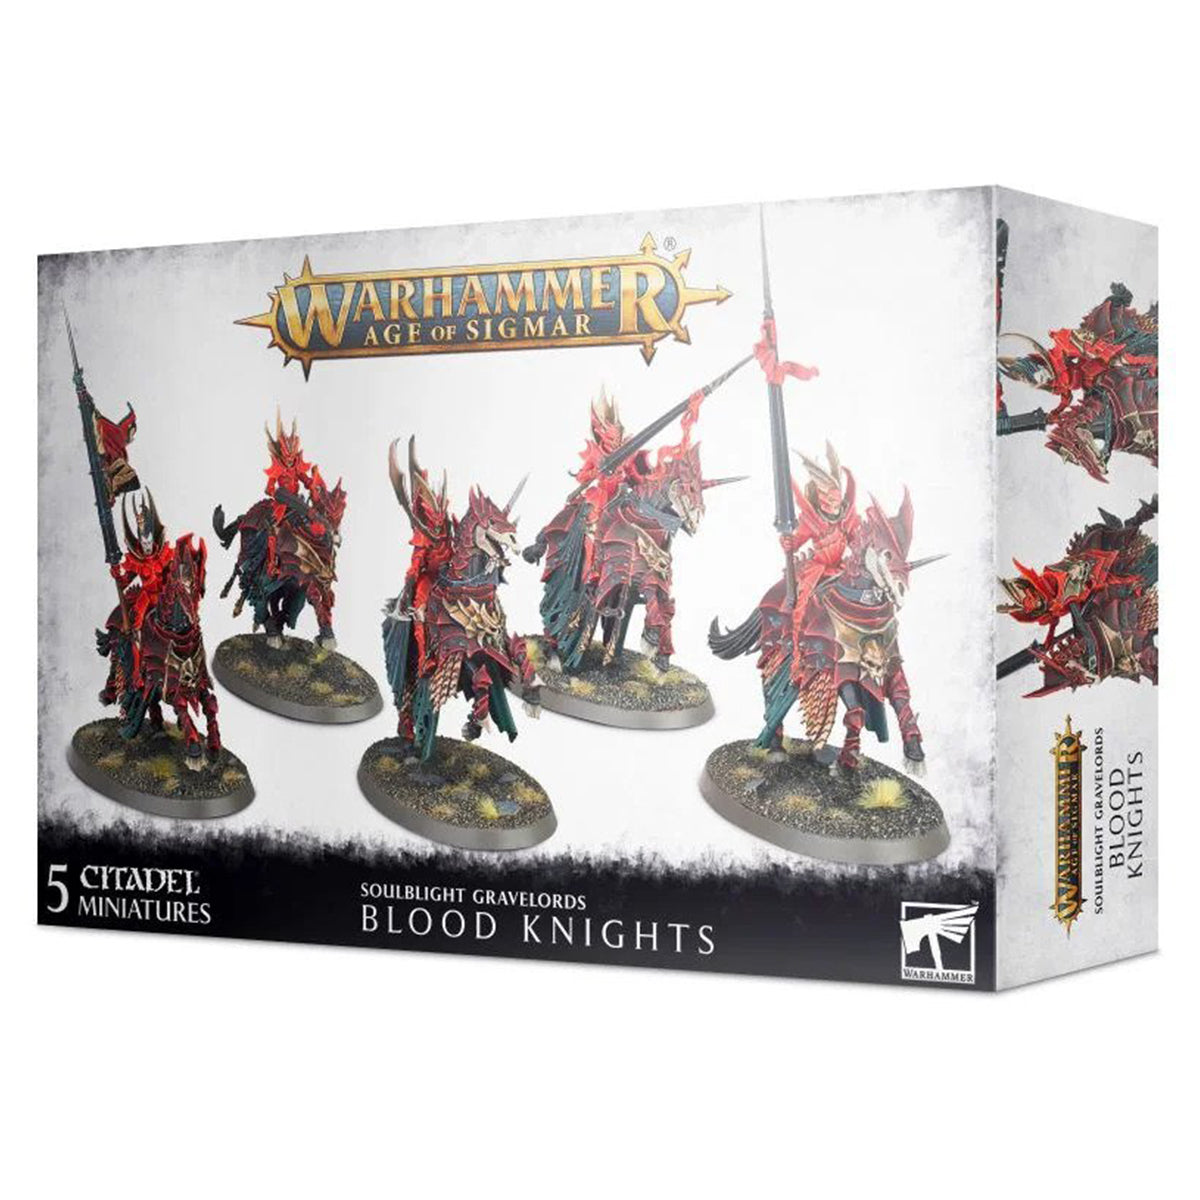 Soulblight Gravelords - Blood Knights (Warhammer Age of Sigmar)